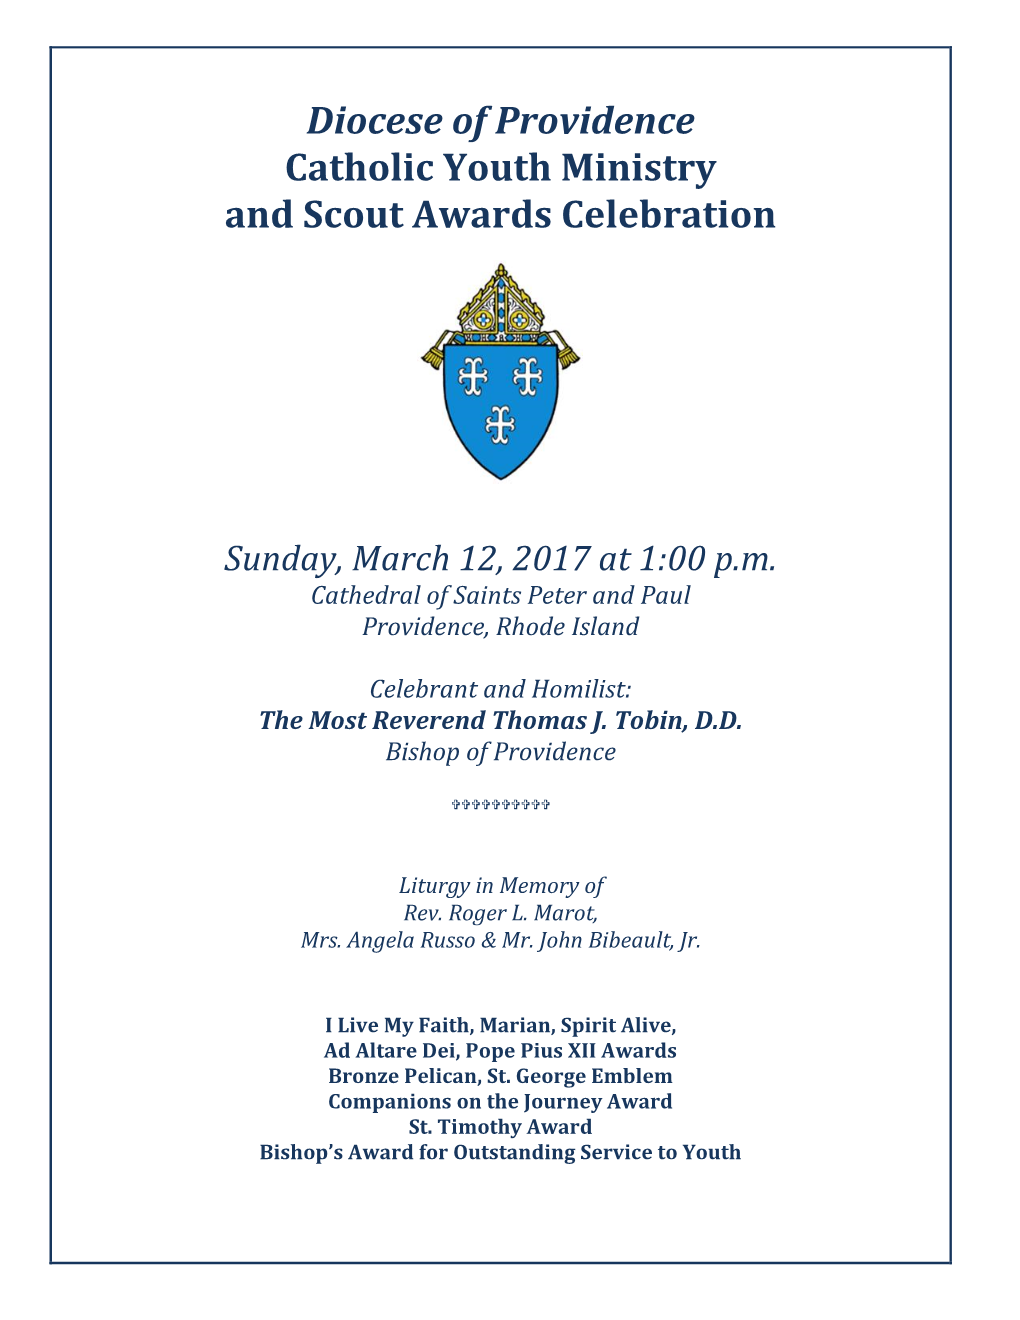 Diocese of Providence Catholic Youth Ministry and Scout Awards Celebration